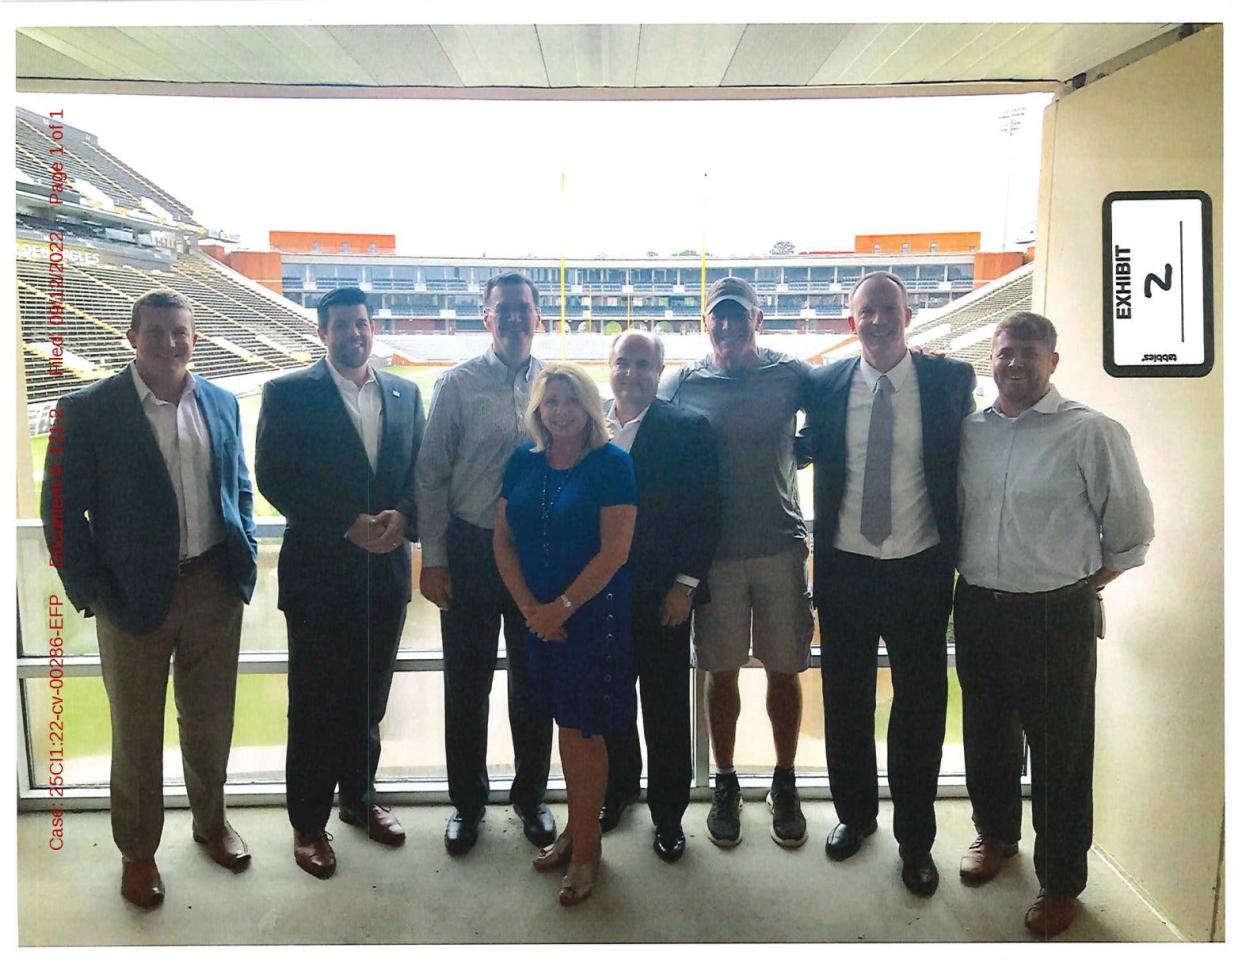 Former NFL football player Brett Favre, welfare officials and University of Southern Mississippi staffers met in July of 2017 to discuss the welfare agency funding the construction of a multi-million dollar volleyball stadium on campus. From left to right, attendees of the gathering were former professional wrestler Ted “Teddy” DiBiase, MDHS deputy Garrig Sheilds, then-USM Director of Athletics Jon Gilbert, Mississippi Community Education Center founder Nancy New, then-MDHS Director John Davis, Favre, another university athletics staffer Daniel Feig and Zach New.